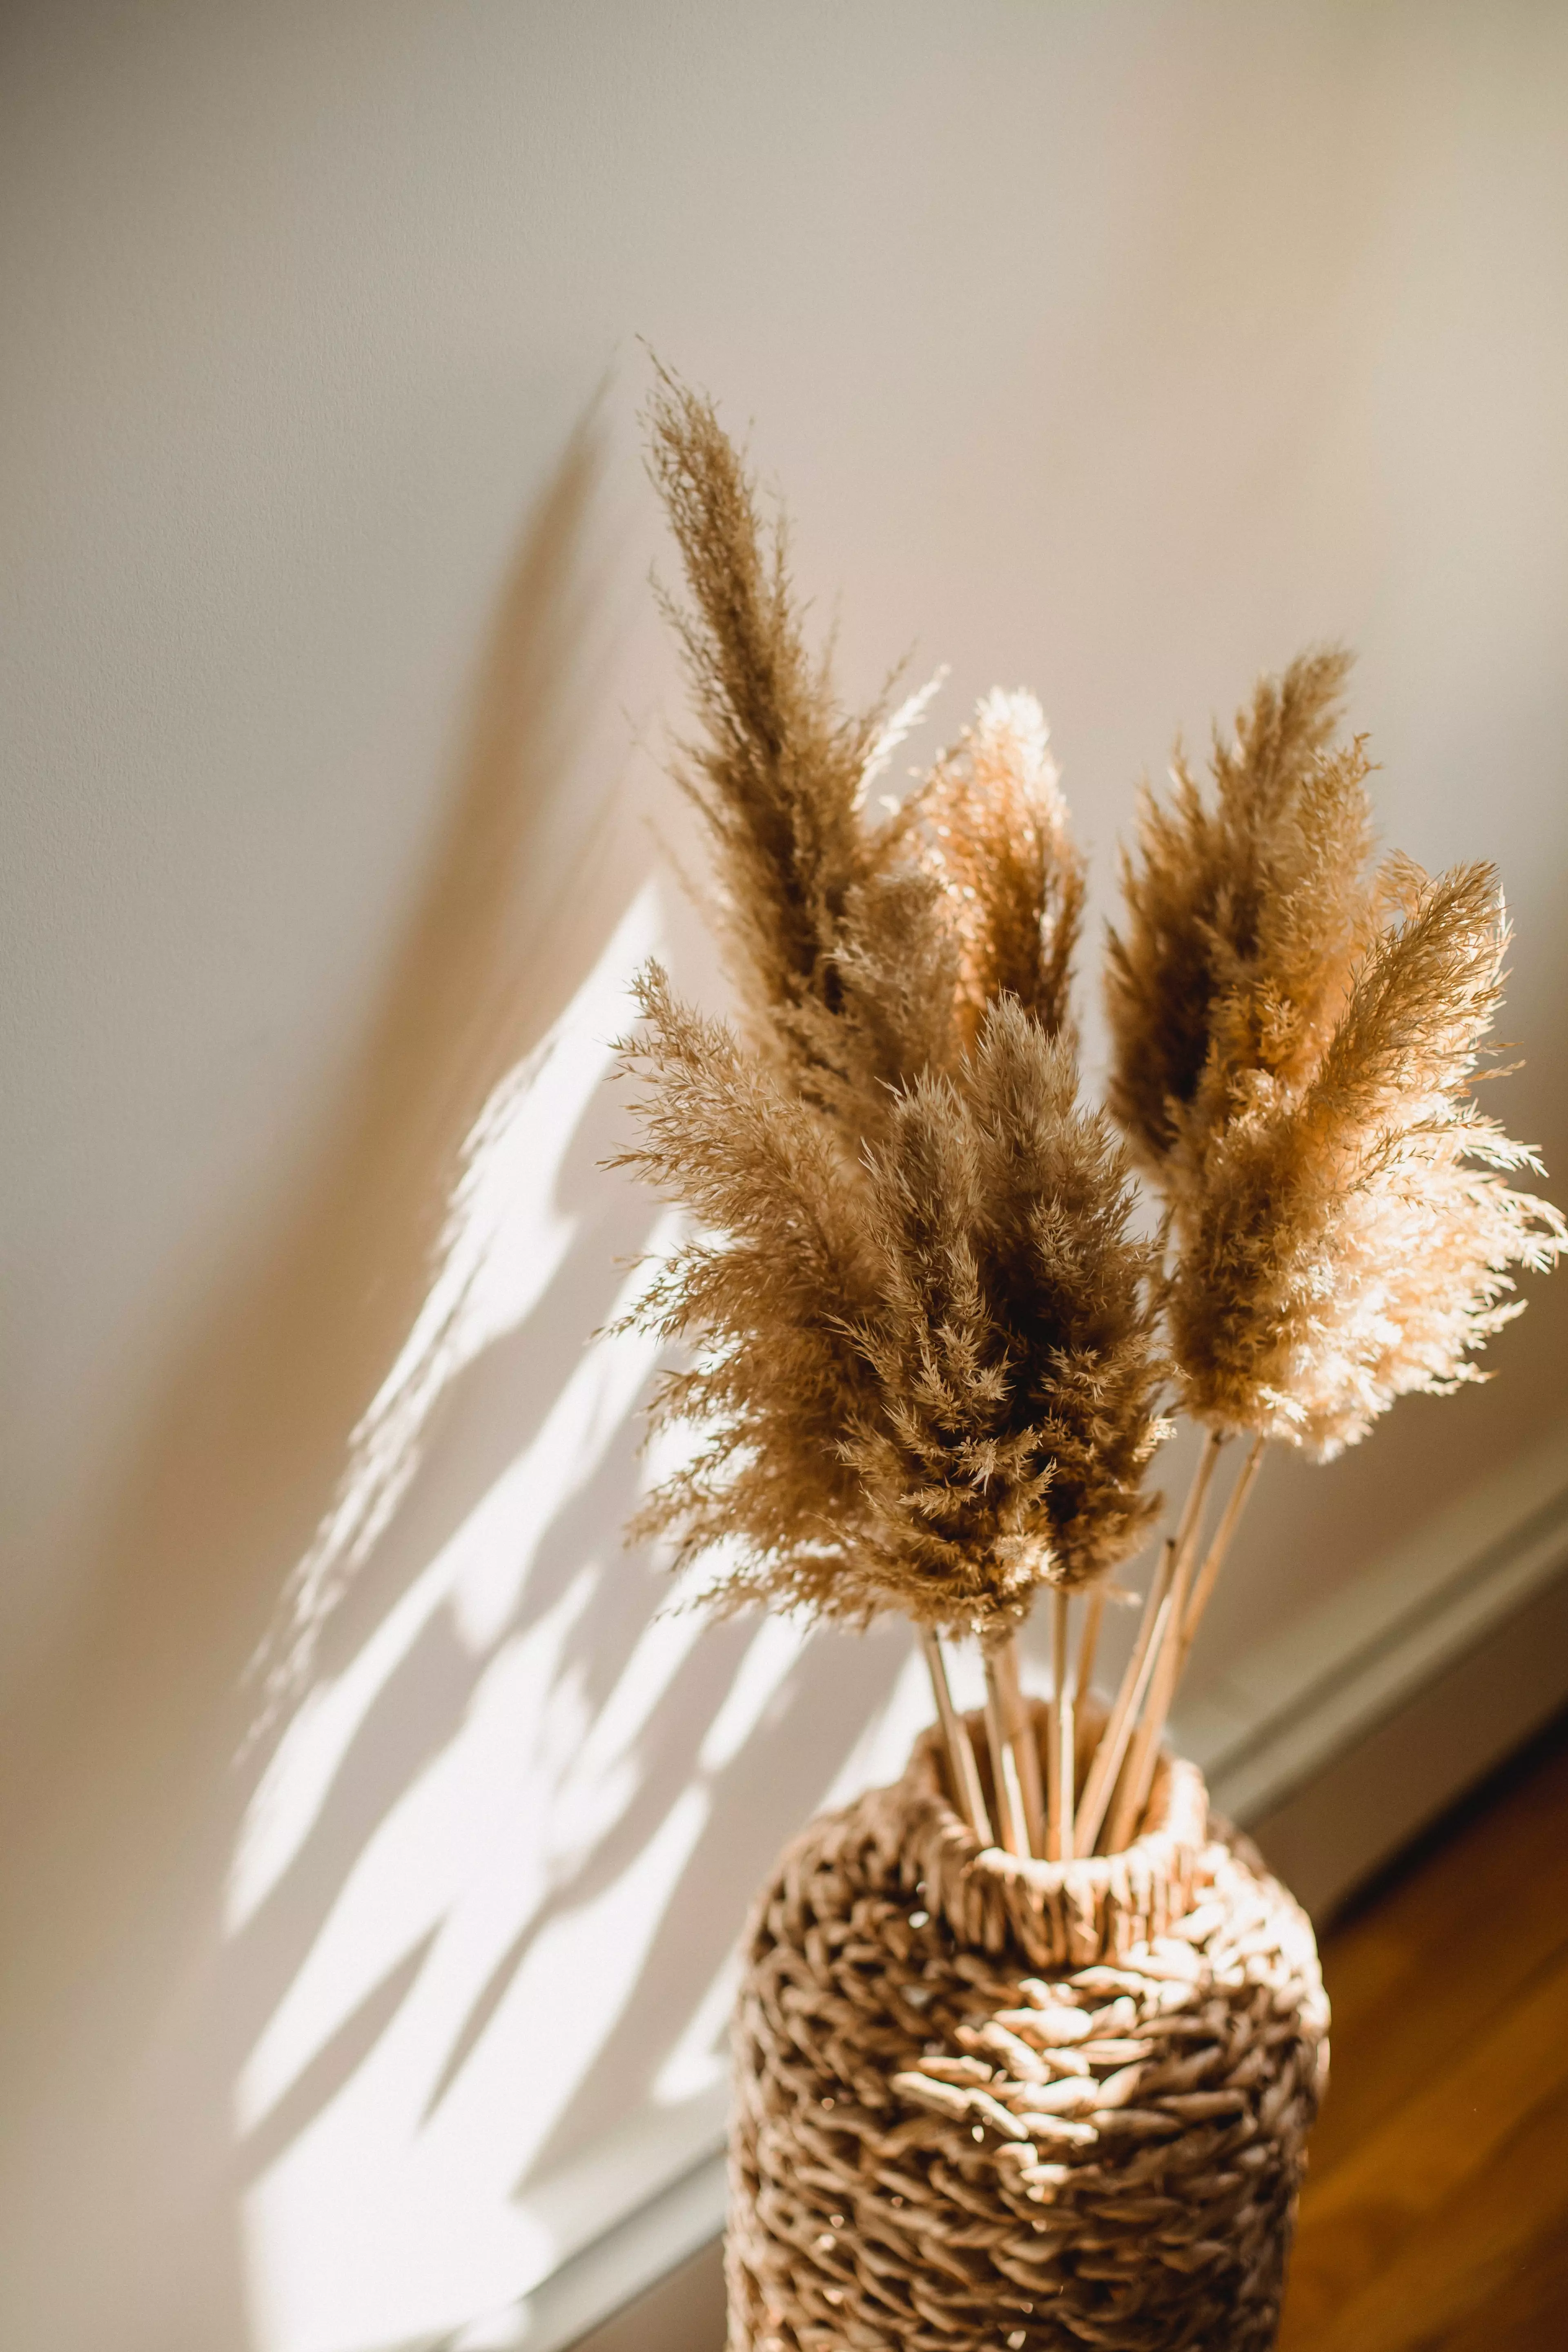 Pampas grass is now a popular indoor plant (